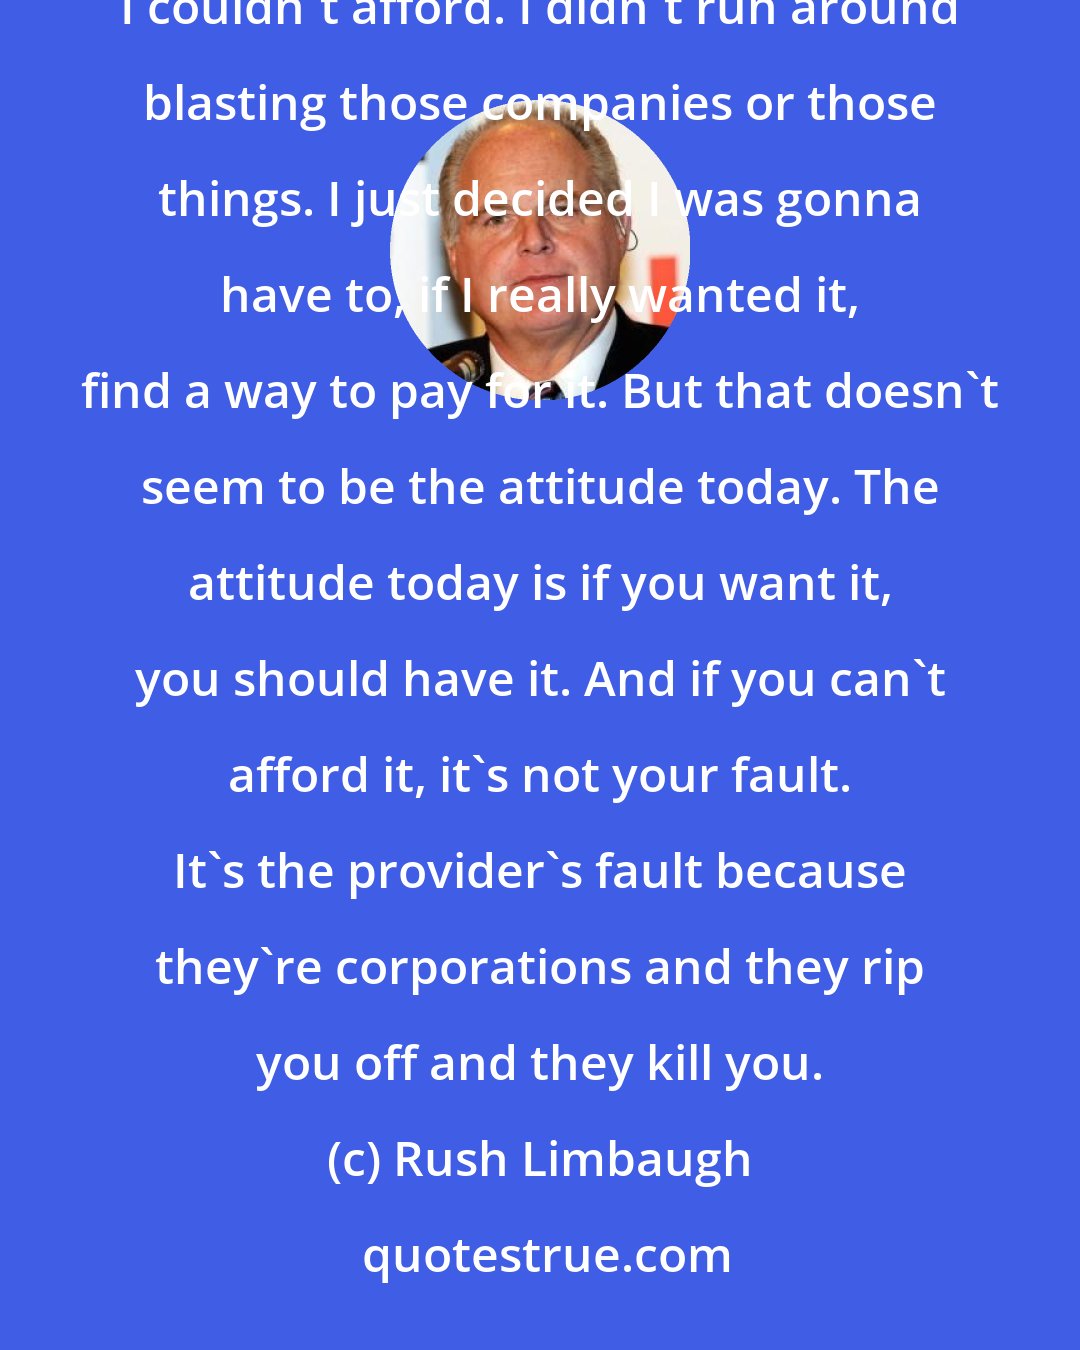 Rush Limbaugh: When I was growing up, I never expected to be able to afford everything I wanted. There are certain things I couldn't afford. I didn't run around blasting those companies or those things. I just decided I was gonna have to, if I really wanted it, find a way to pay for it. But that doesn't seem to be the attitude today. The attitude today is if you want it, you should have it. And if you can't afford it, it's not your fault. It's the provider's fault because they're corporations and they rip you off and they kill you.